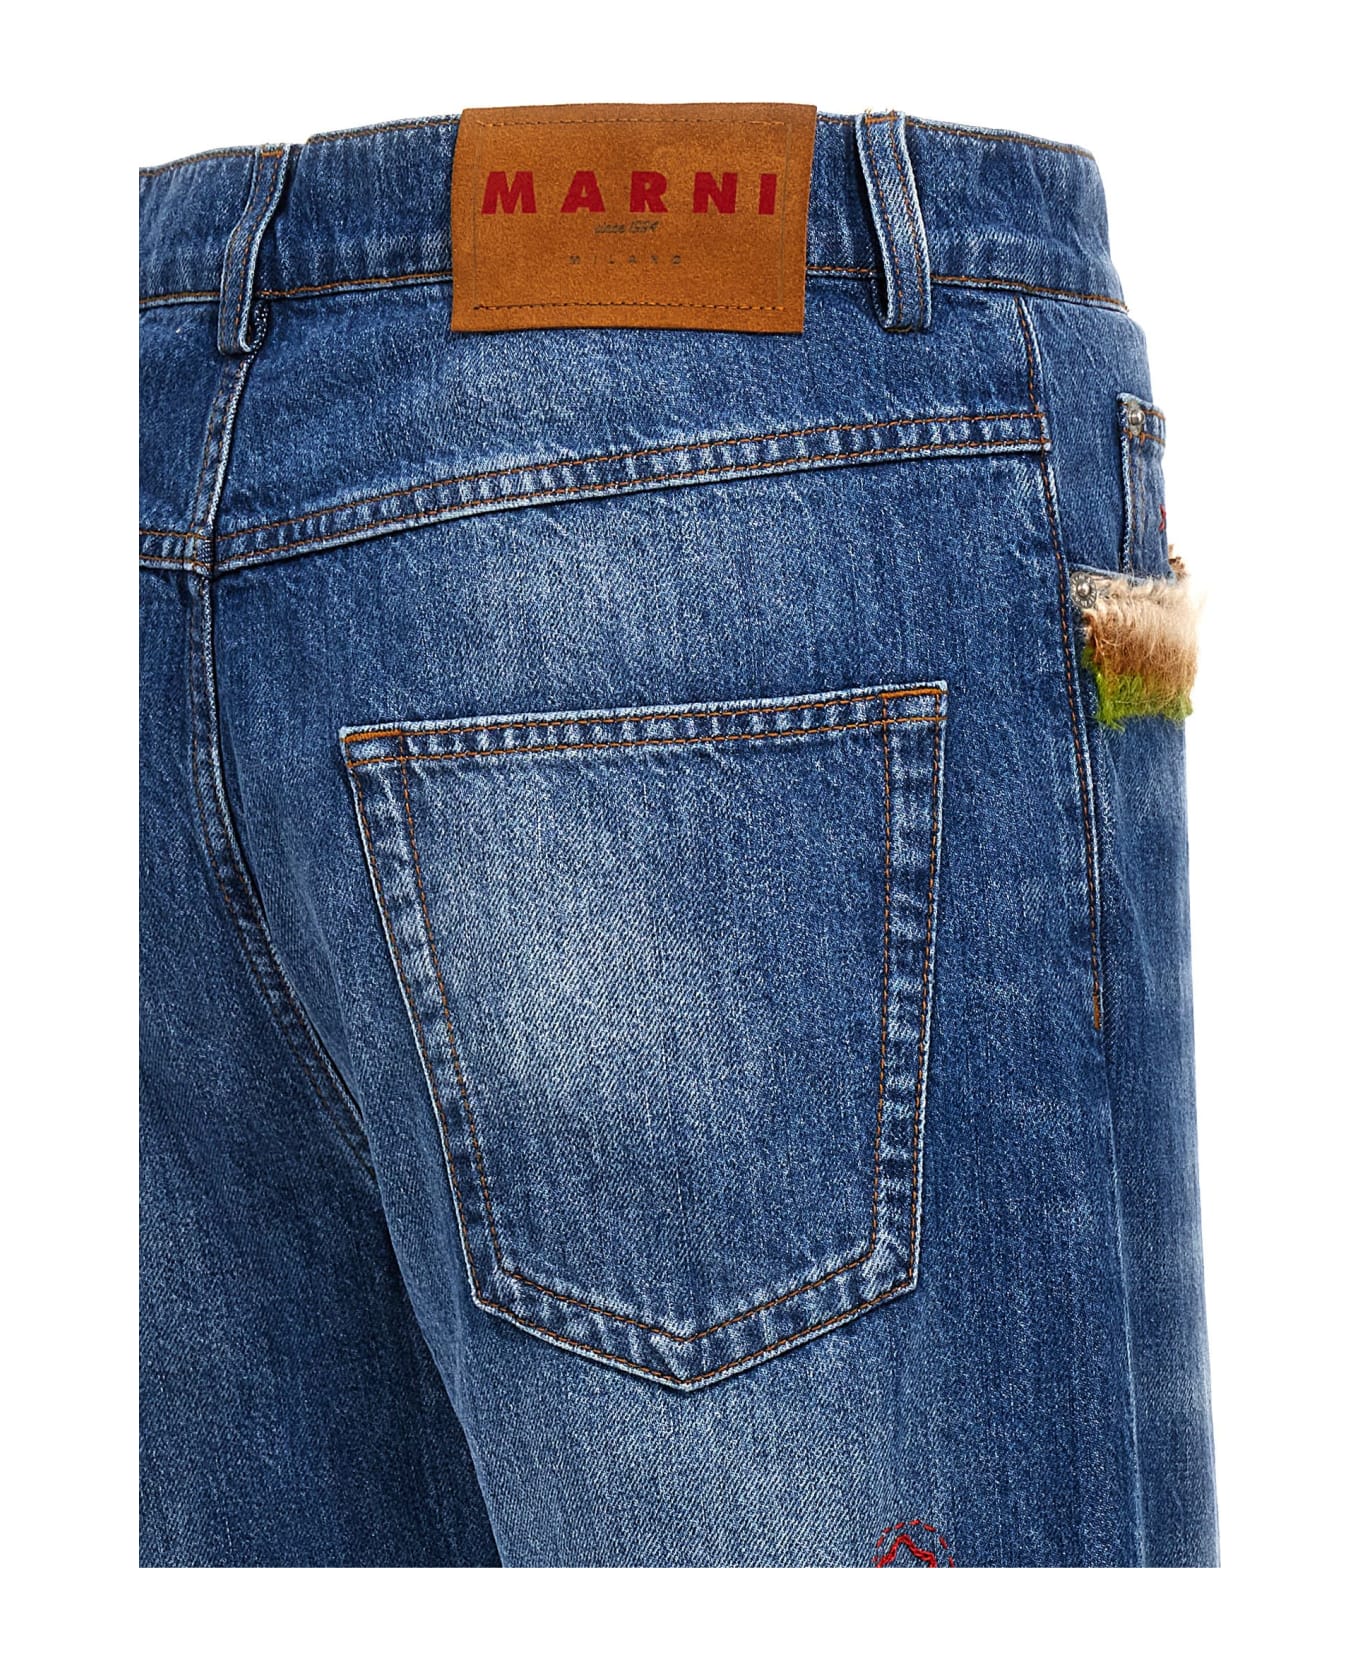 Marni Embroidery Jeans And Patches - Denim デニム